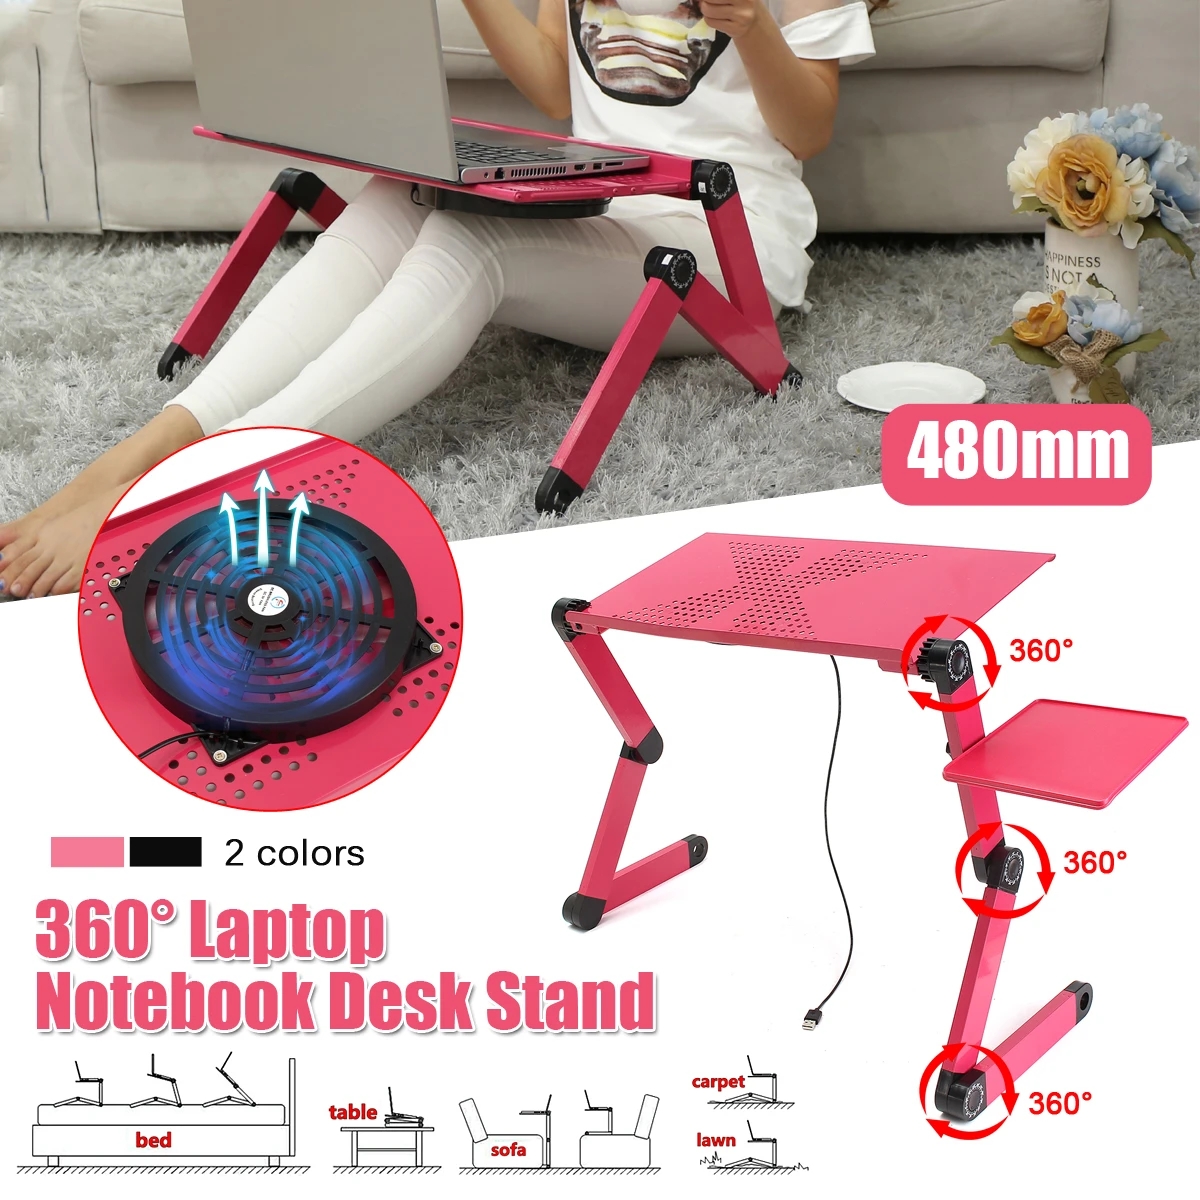 Adjustable-Laptop-Table-Laptop-Desk-Portable-Foldable-Stand-Bed-Tray-Laptop-with-Cooling-Fan-and-Mou-1845677-2